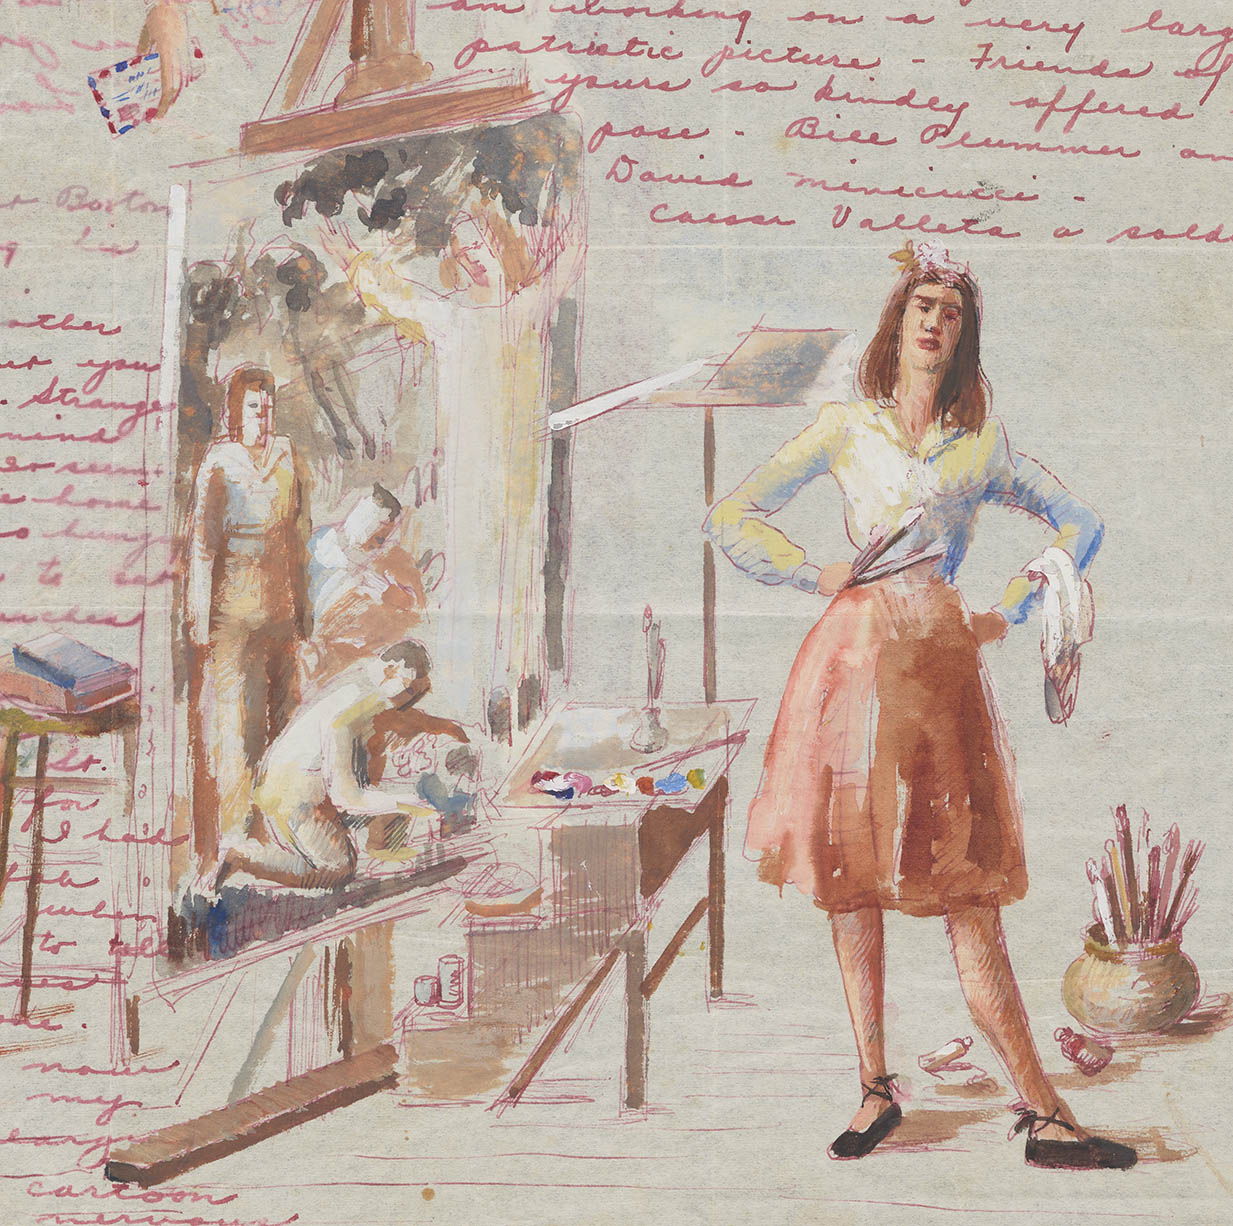 Detail of illustrated letter handwritten in red ink on onion skin paper, featuring self-portraits of the author in various poses including reading a letter, in her studio next to a large painting.